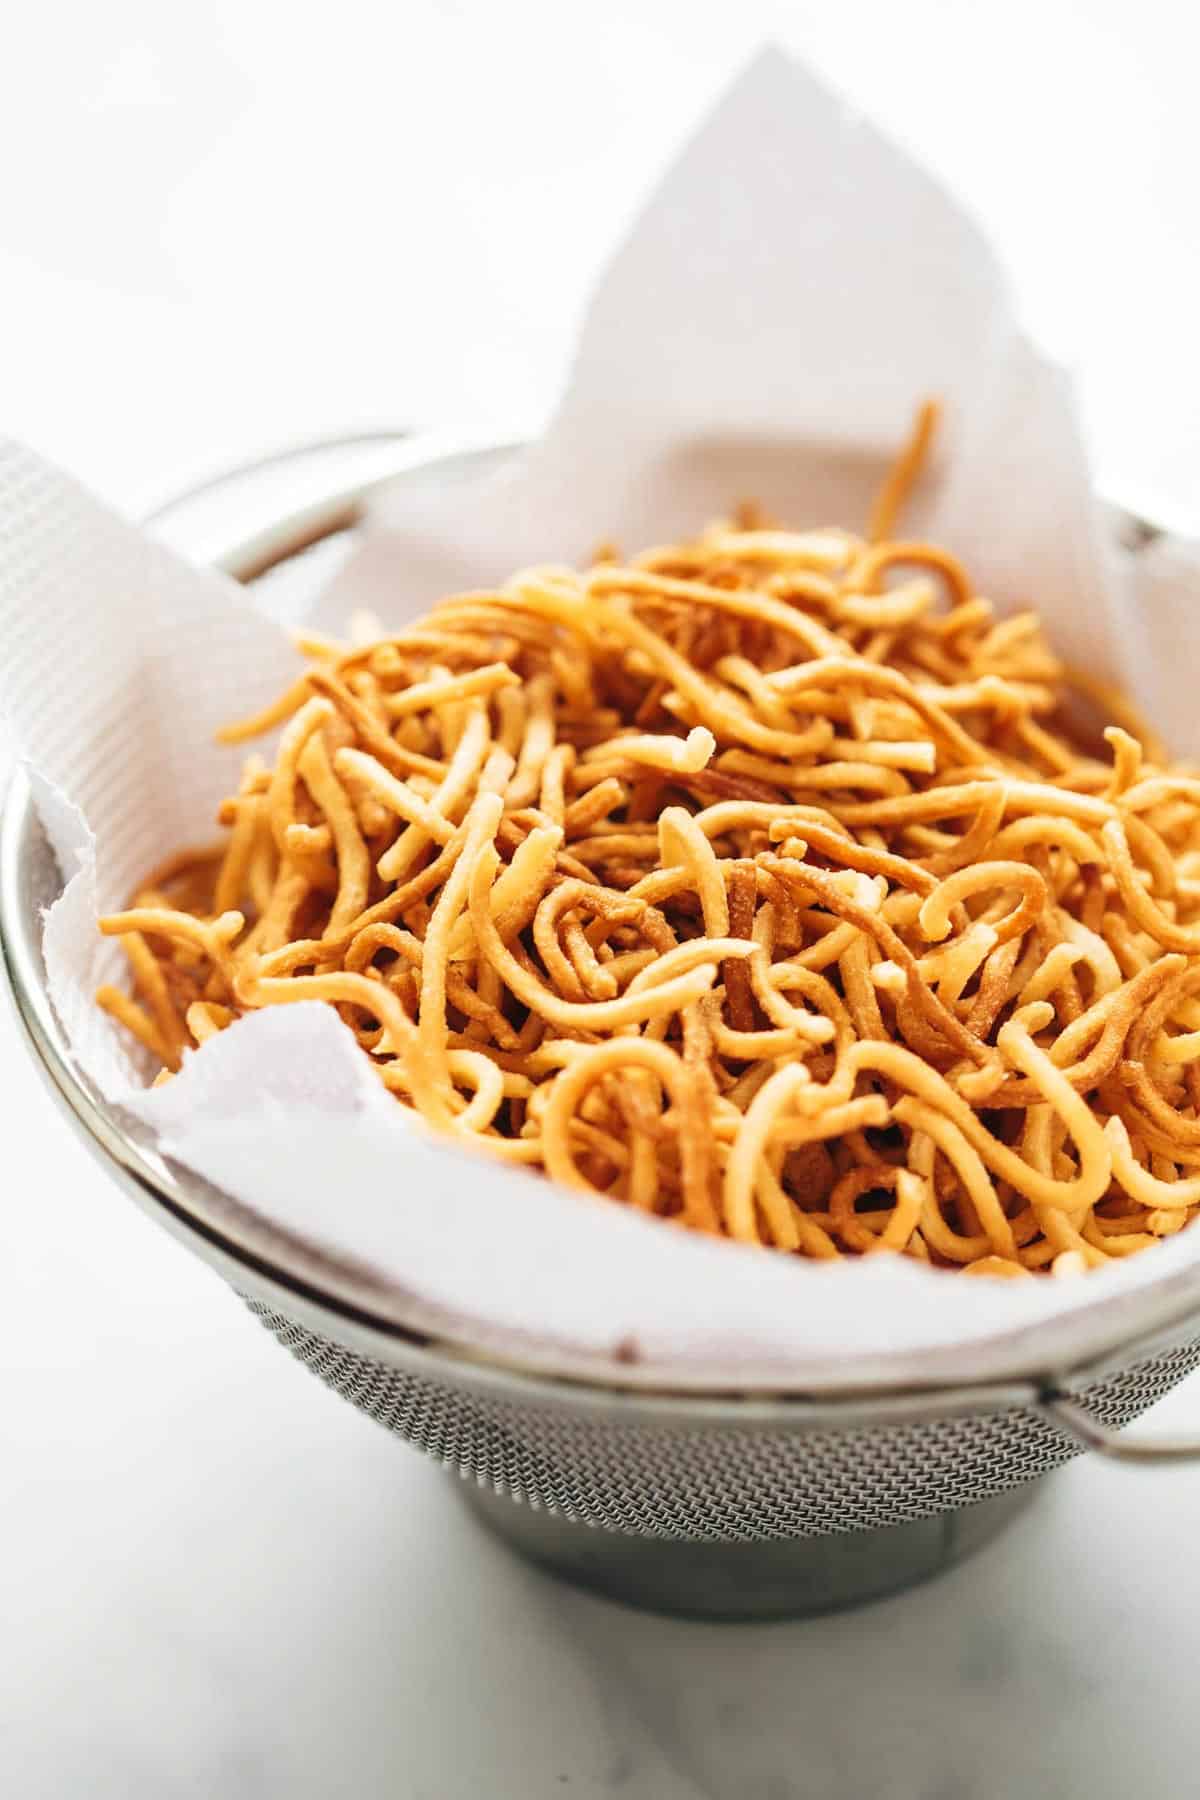 Crispy Fried Noodles stored on tissue paper in a sieve